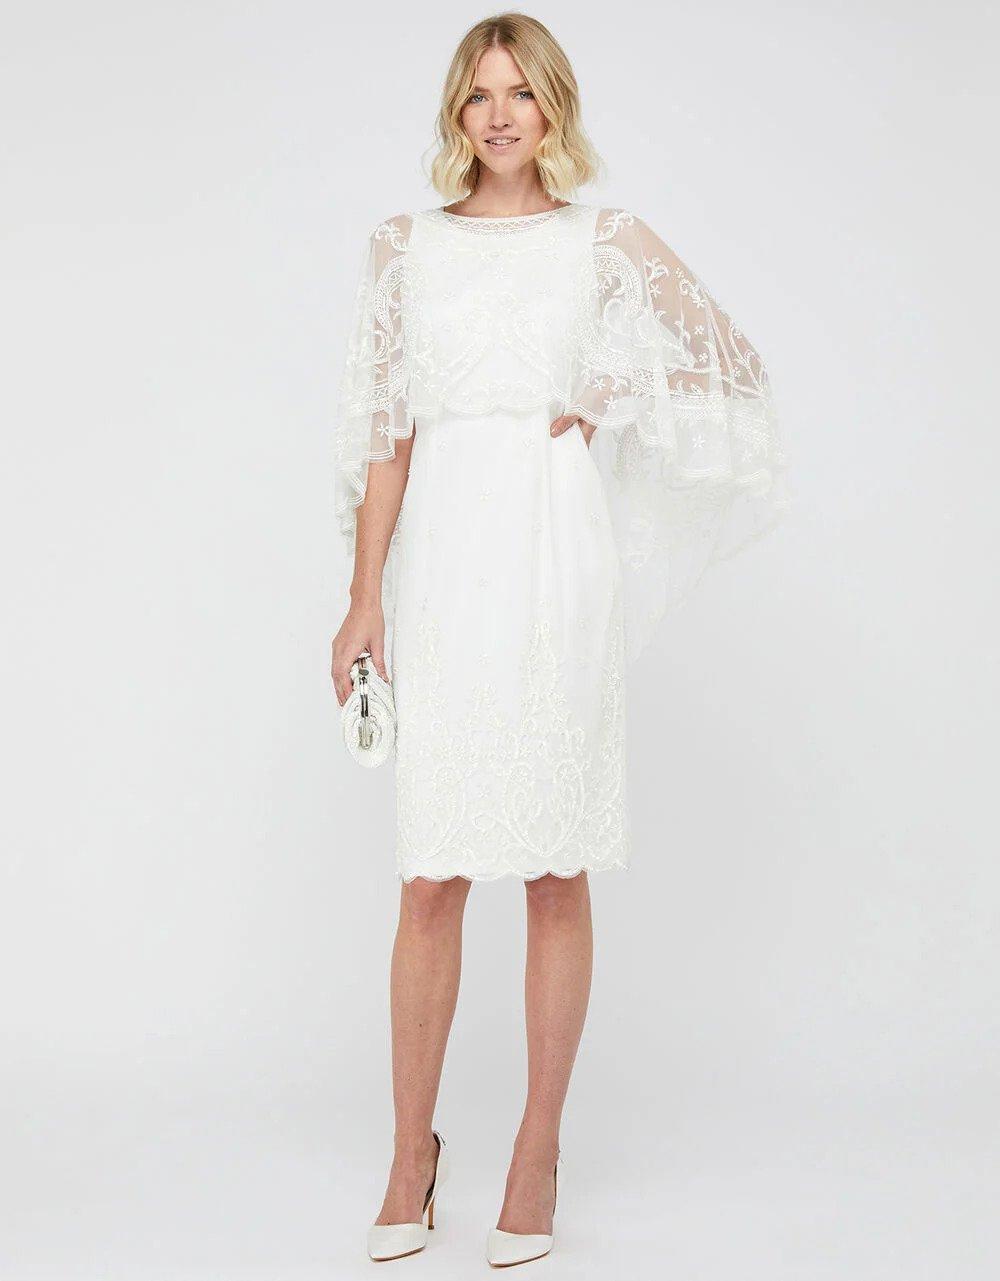 Monsoon wedding dress for older brides in ivory with lace cape